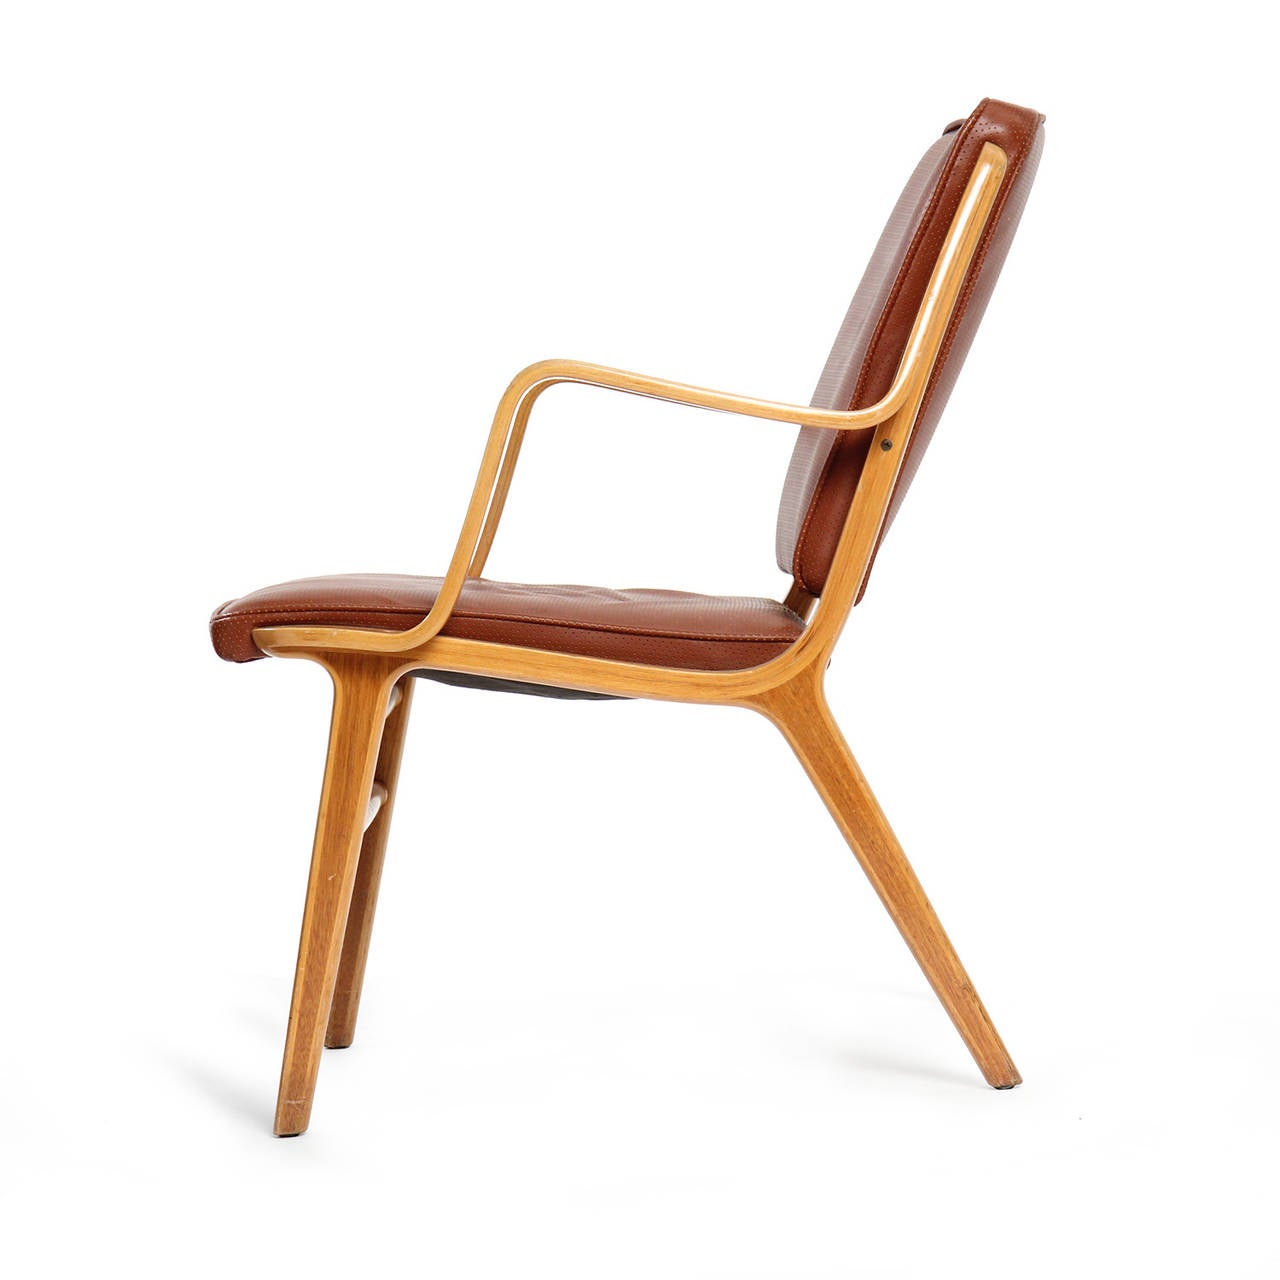 A sculptural and innovative arm chair having frames of laminated teak and beech with an expressive contrasting wood detail.